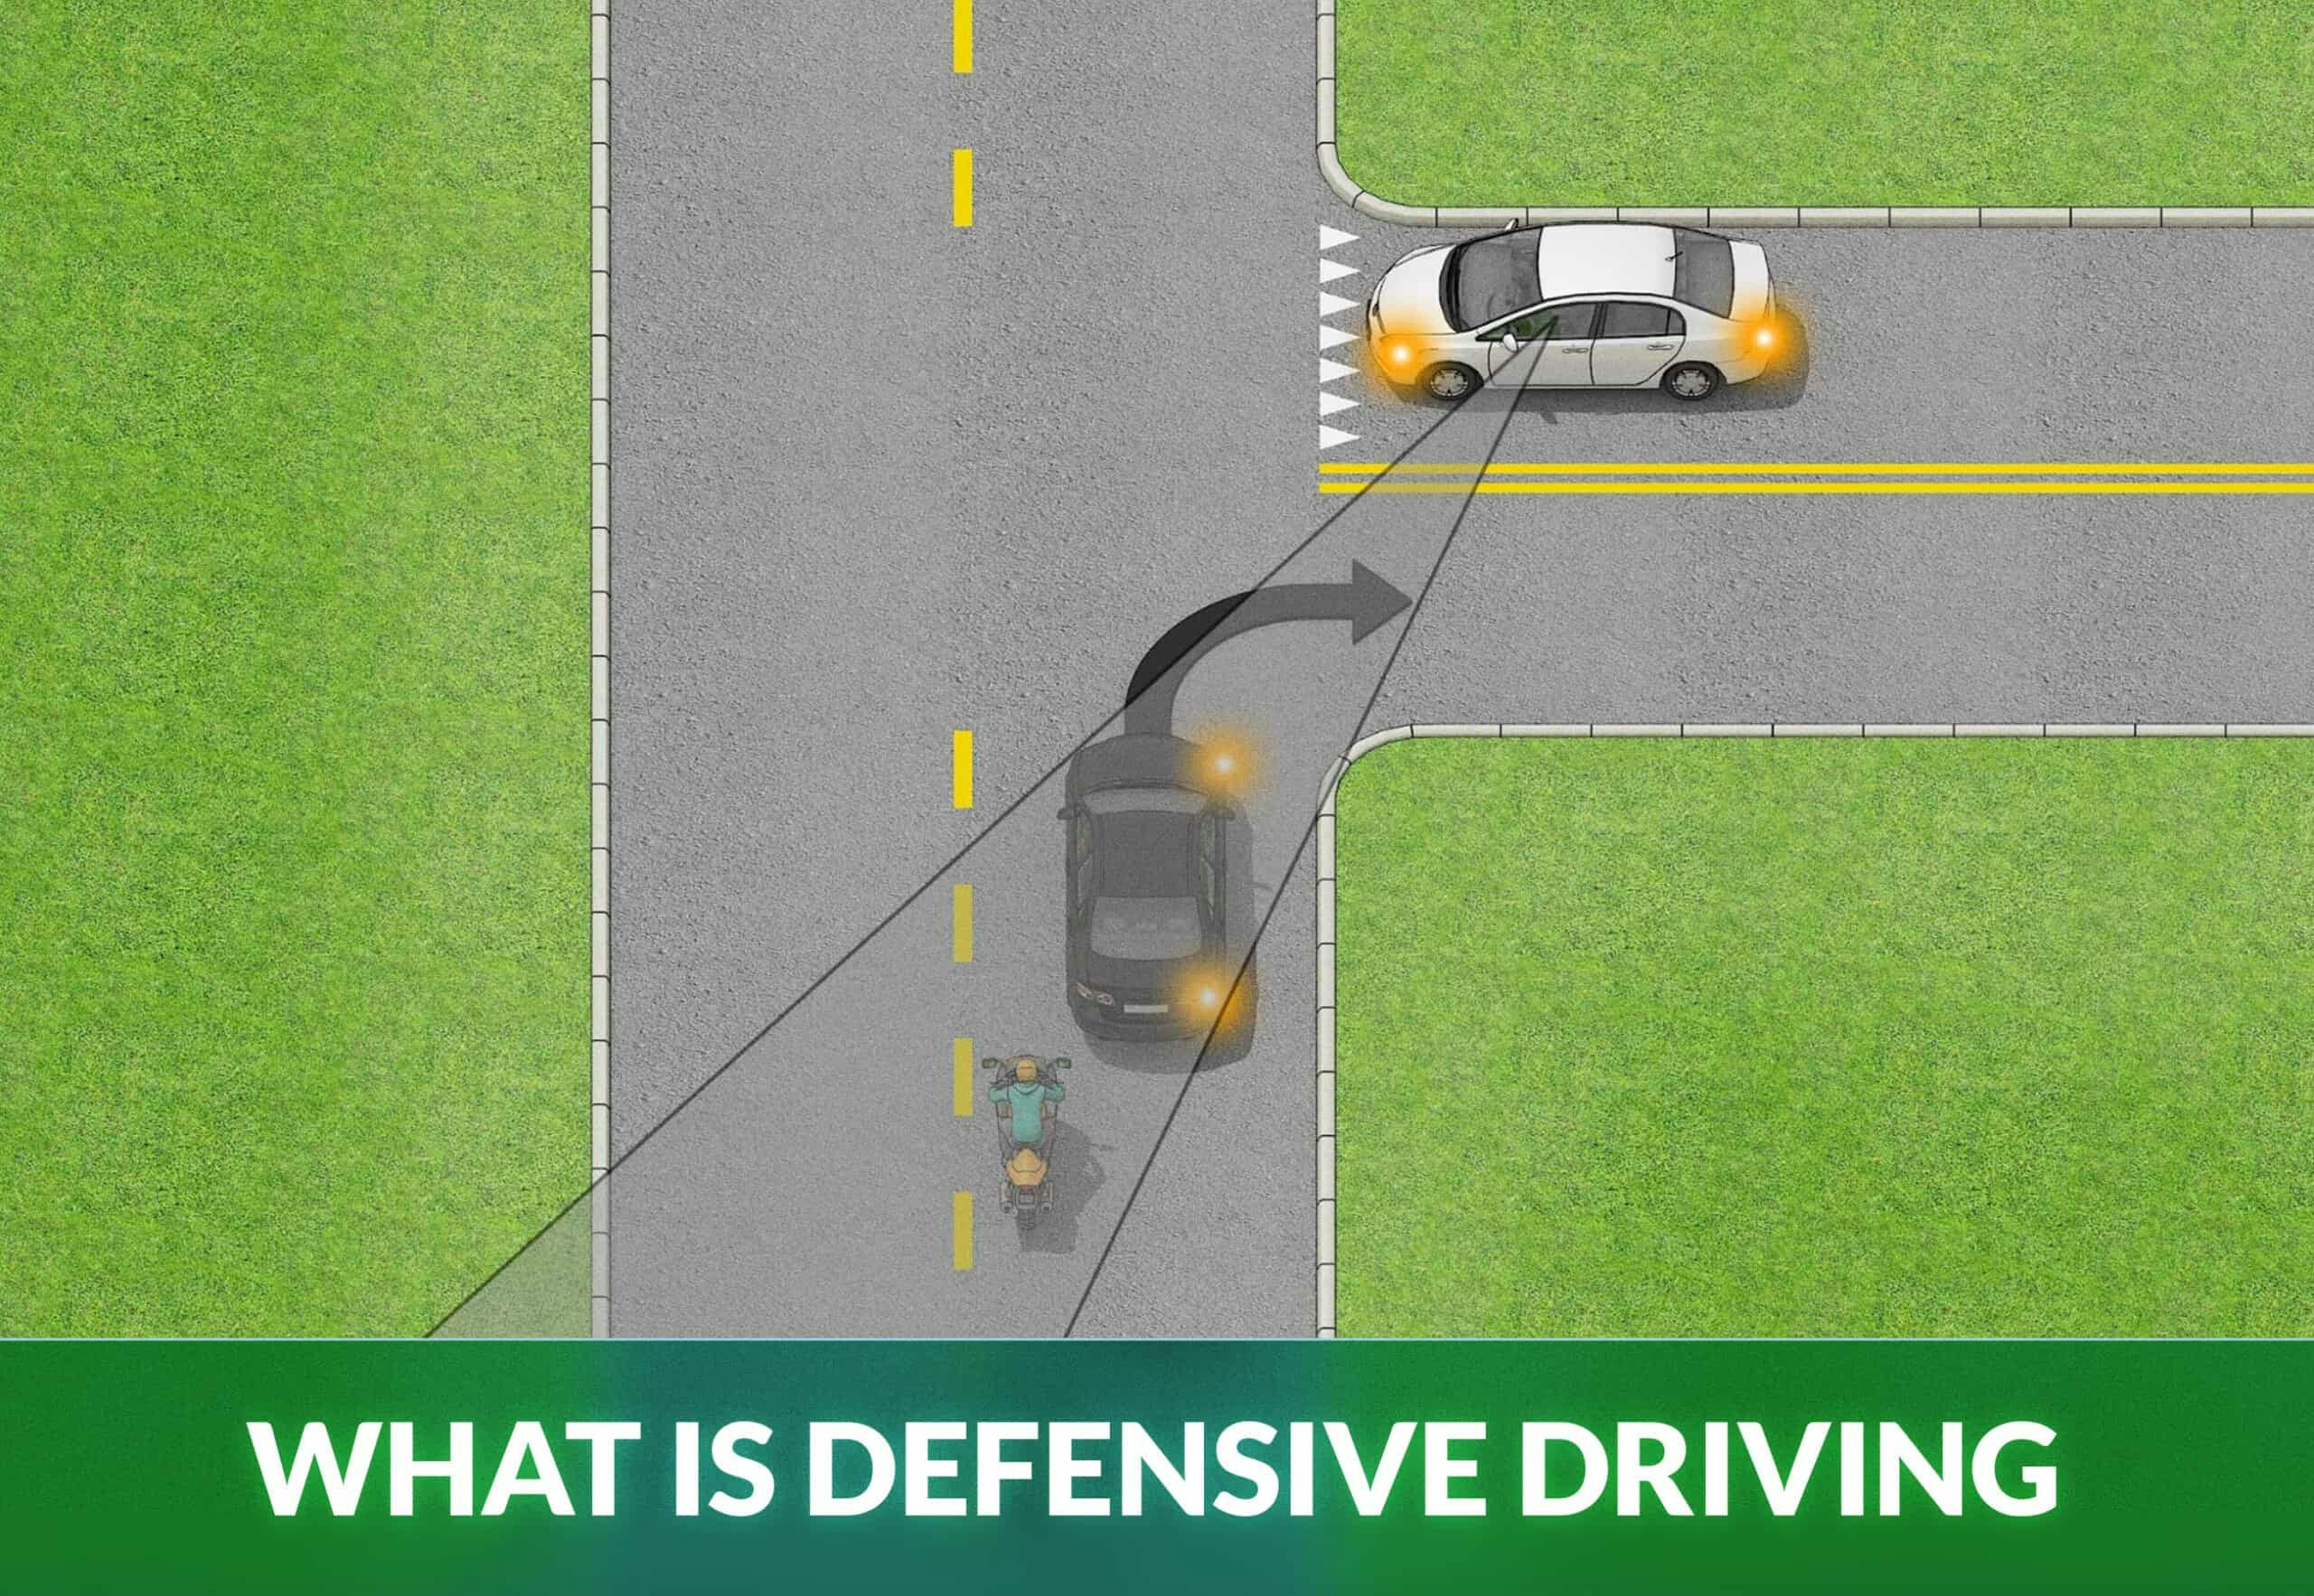 WHAT IS DEFENSIVE DRIVING